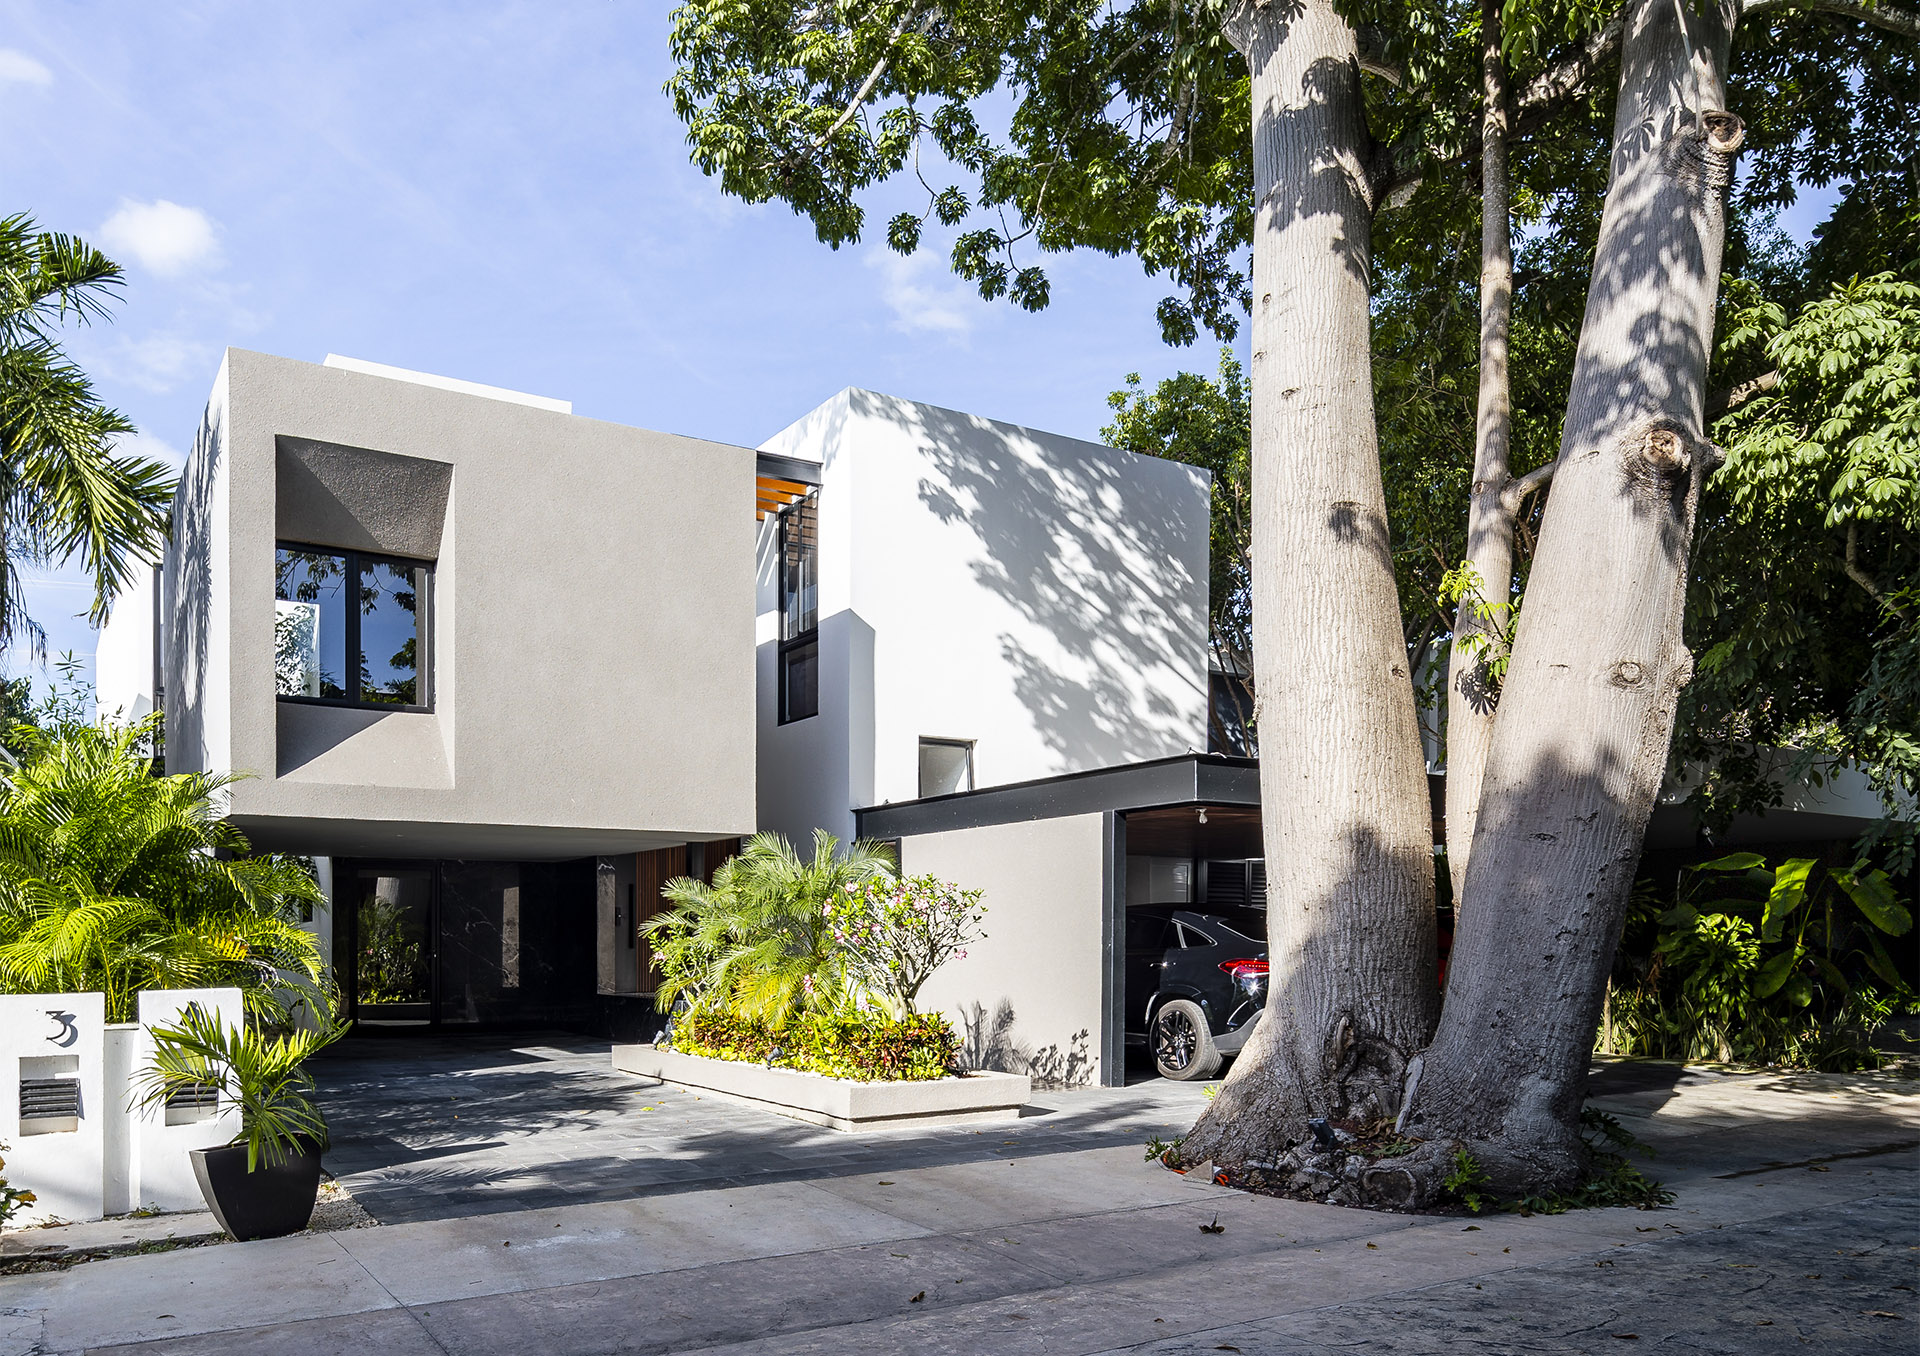 Casa Yaxché and the preserved tree in order to be fully embraced by the housing project